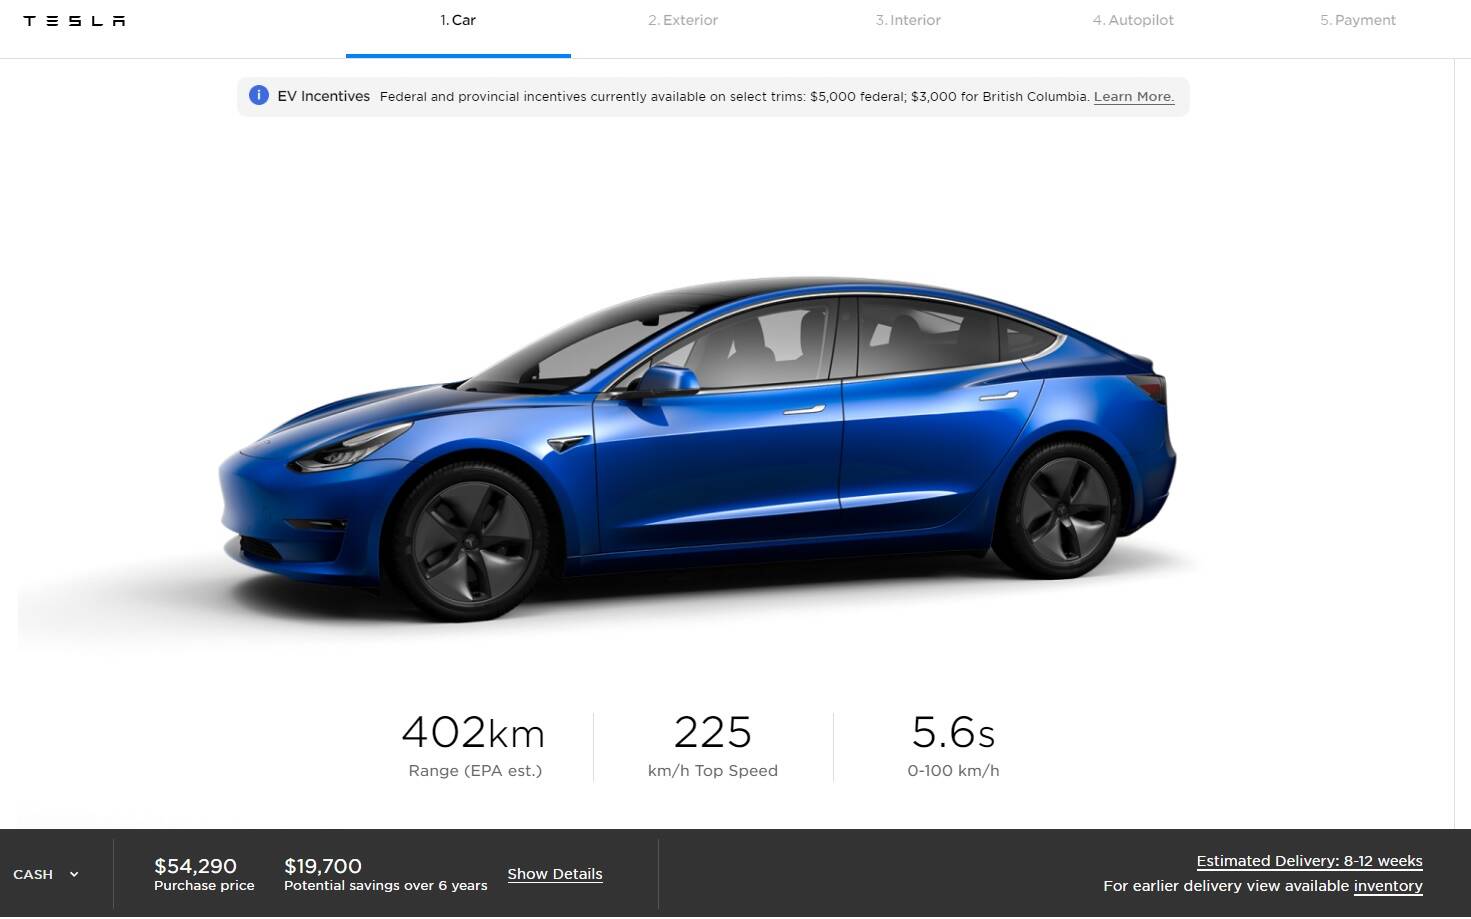 Tesla Model 3 Customer Accidentally Orders 27 of Them - The Car Guide